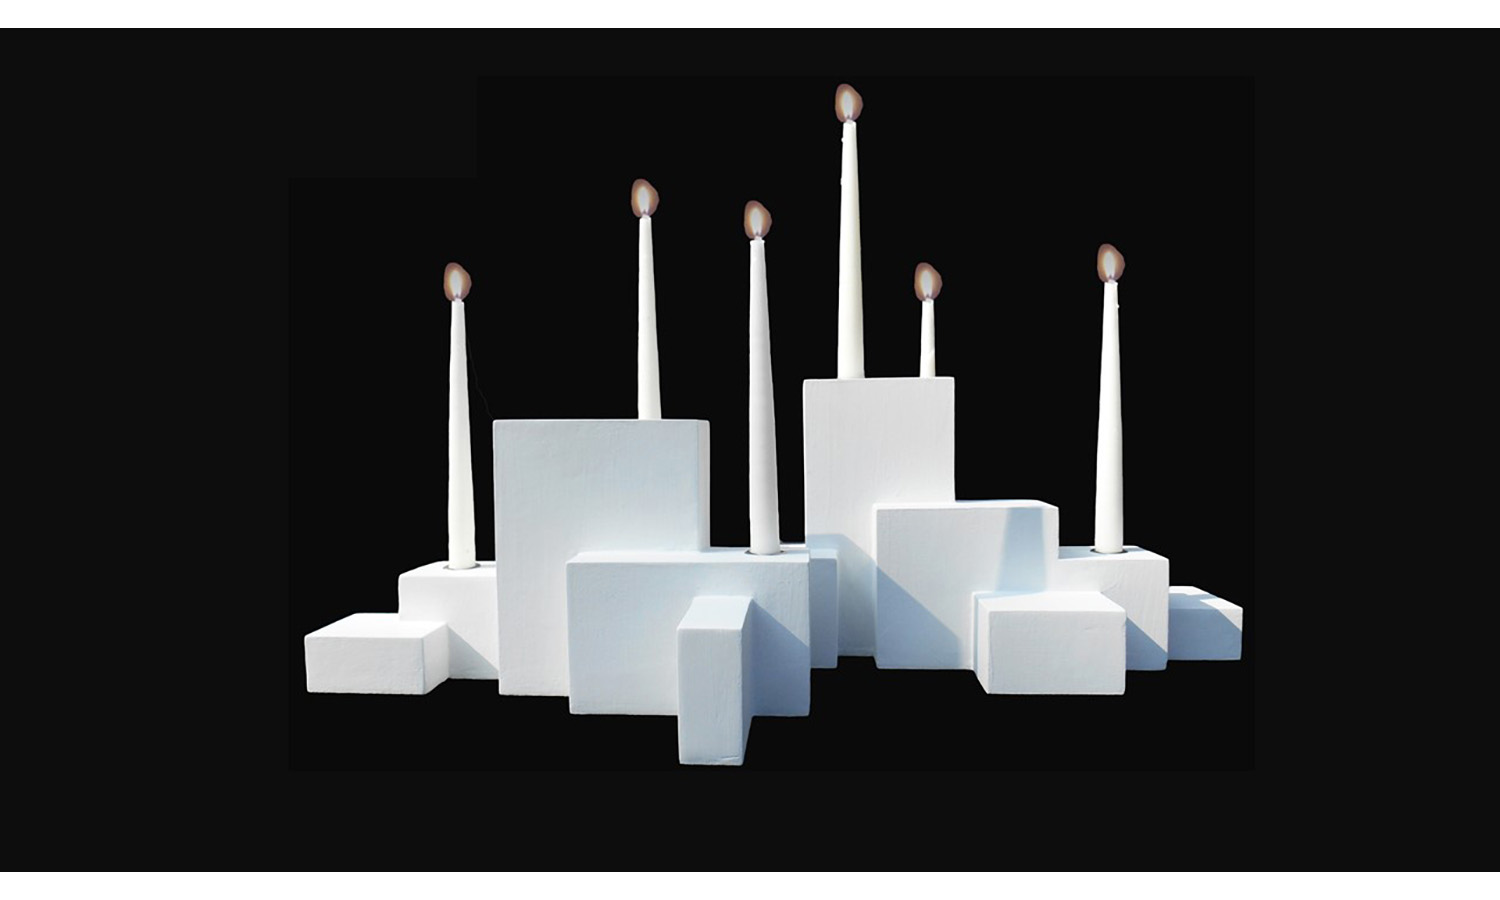 CANDLE HOLDERS (group of three shown), mixed media, sizes vary, 2017